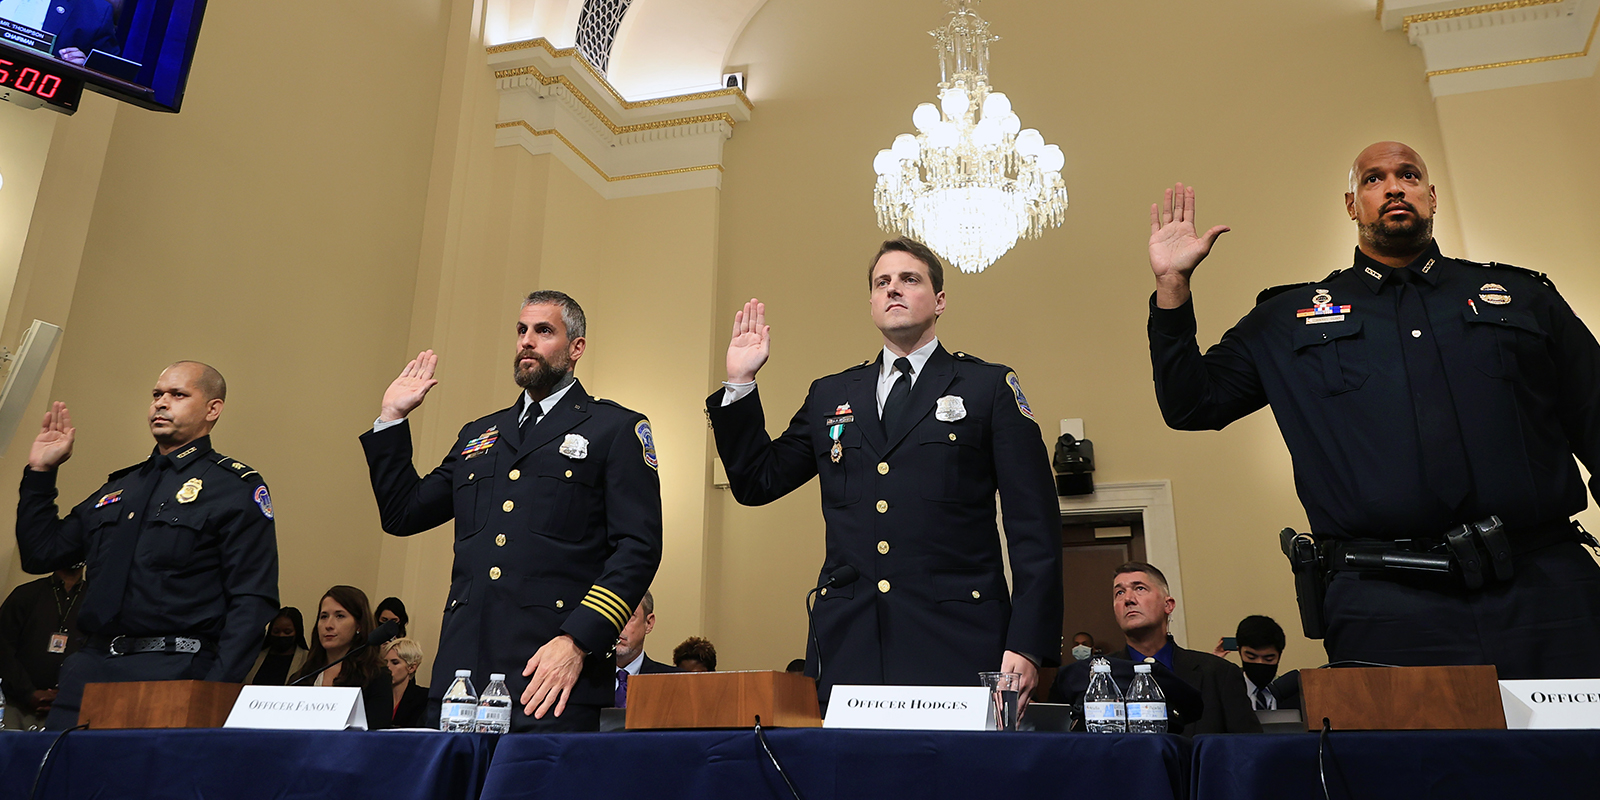 AFSCME applauds officers who defended Capitol on Jan. 6 for their testimony